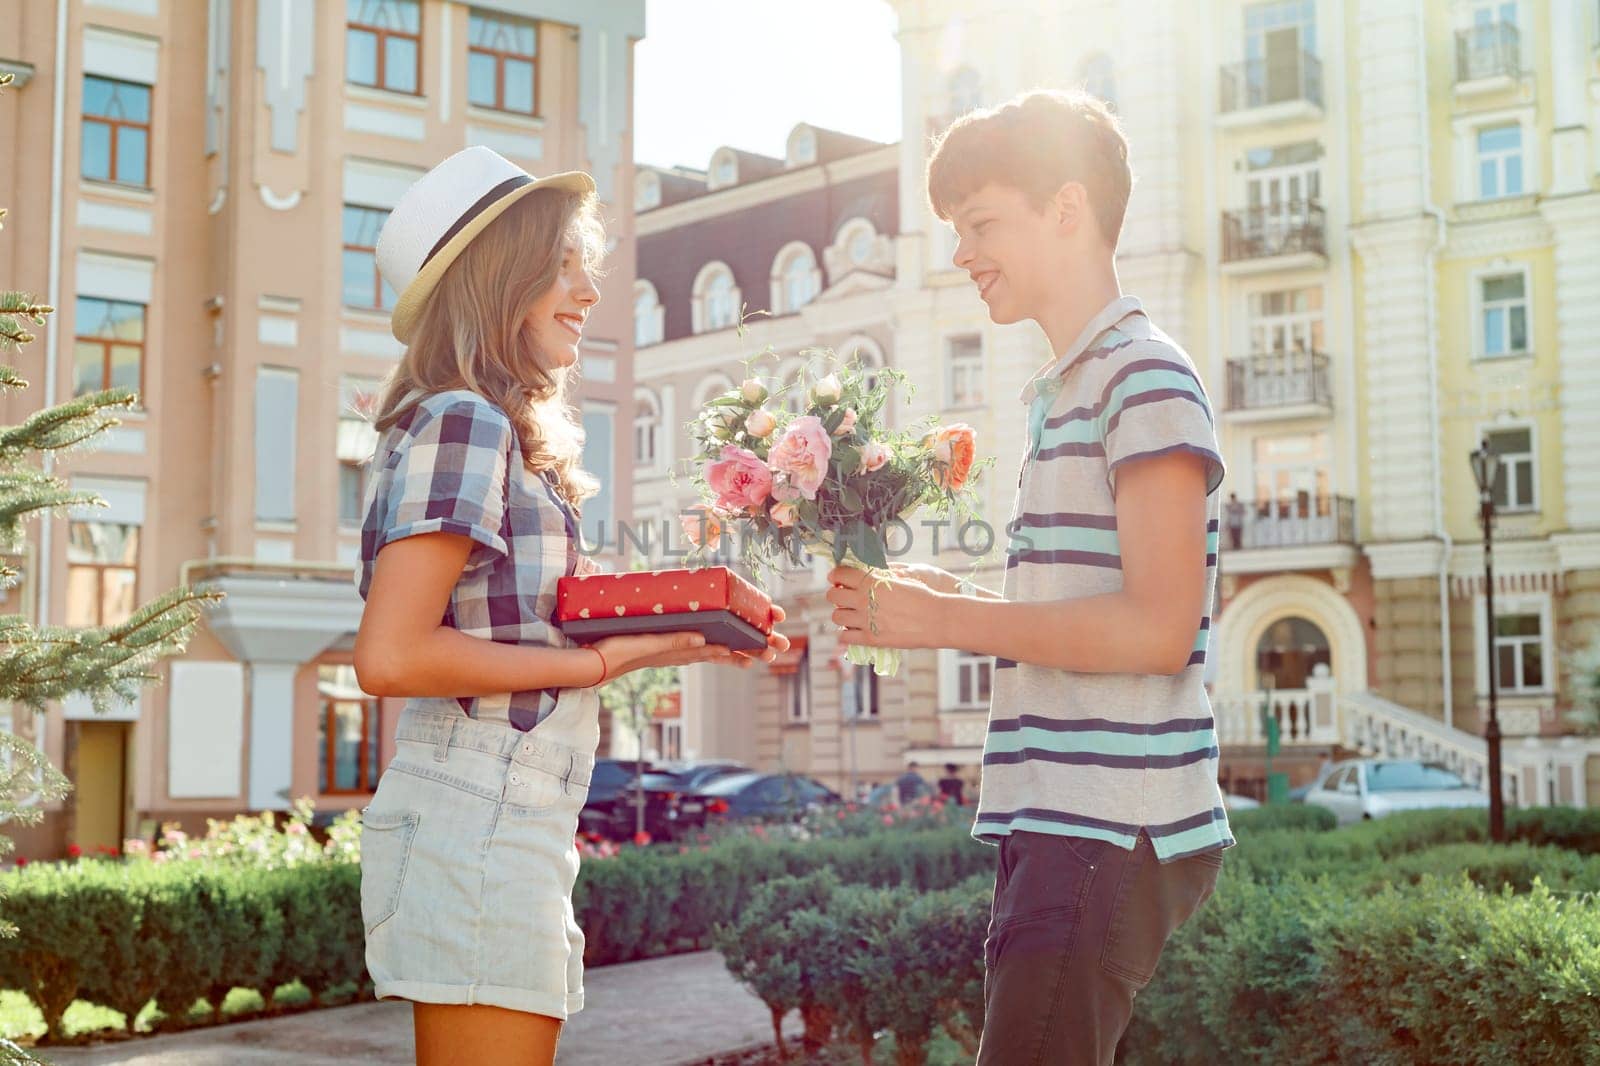 Teen boy congratulates girl with bouquet of flowers and gift, outdoor portrait couple happy youth.